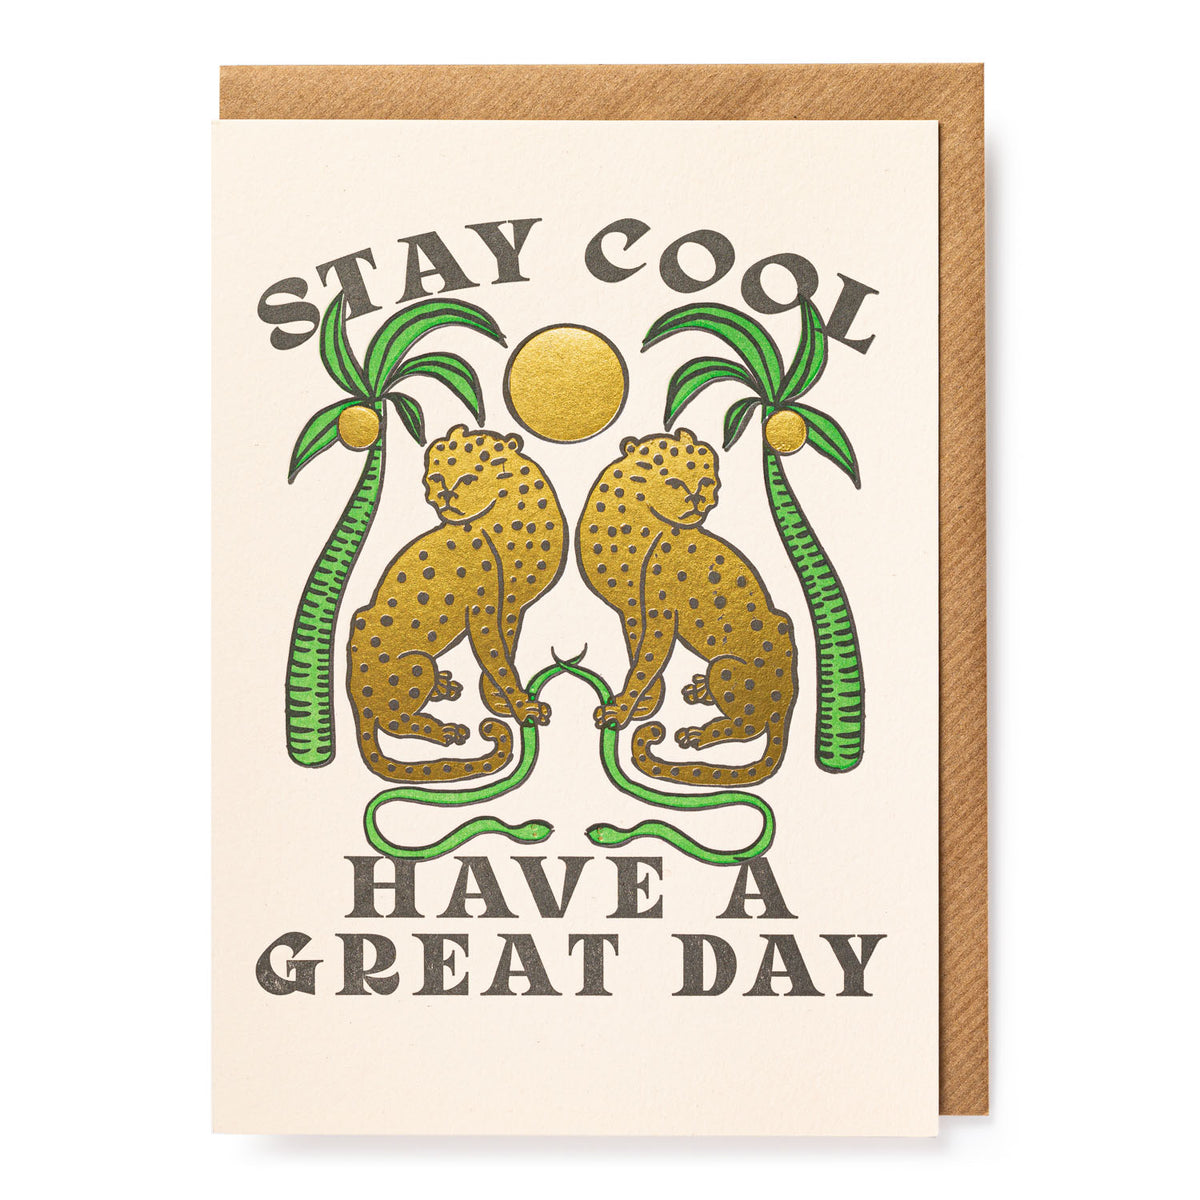 Stay Cool - letterpress printed greeting card